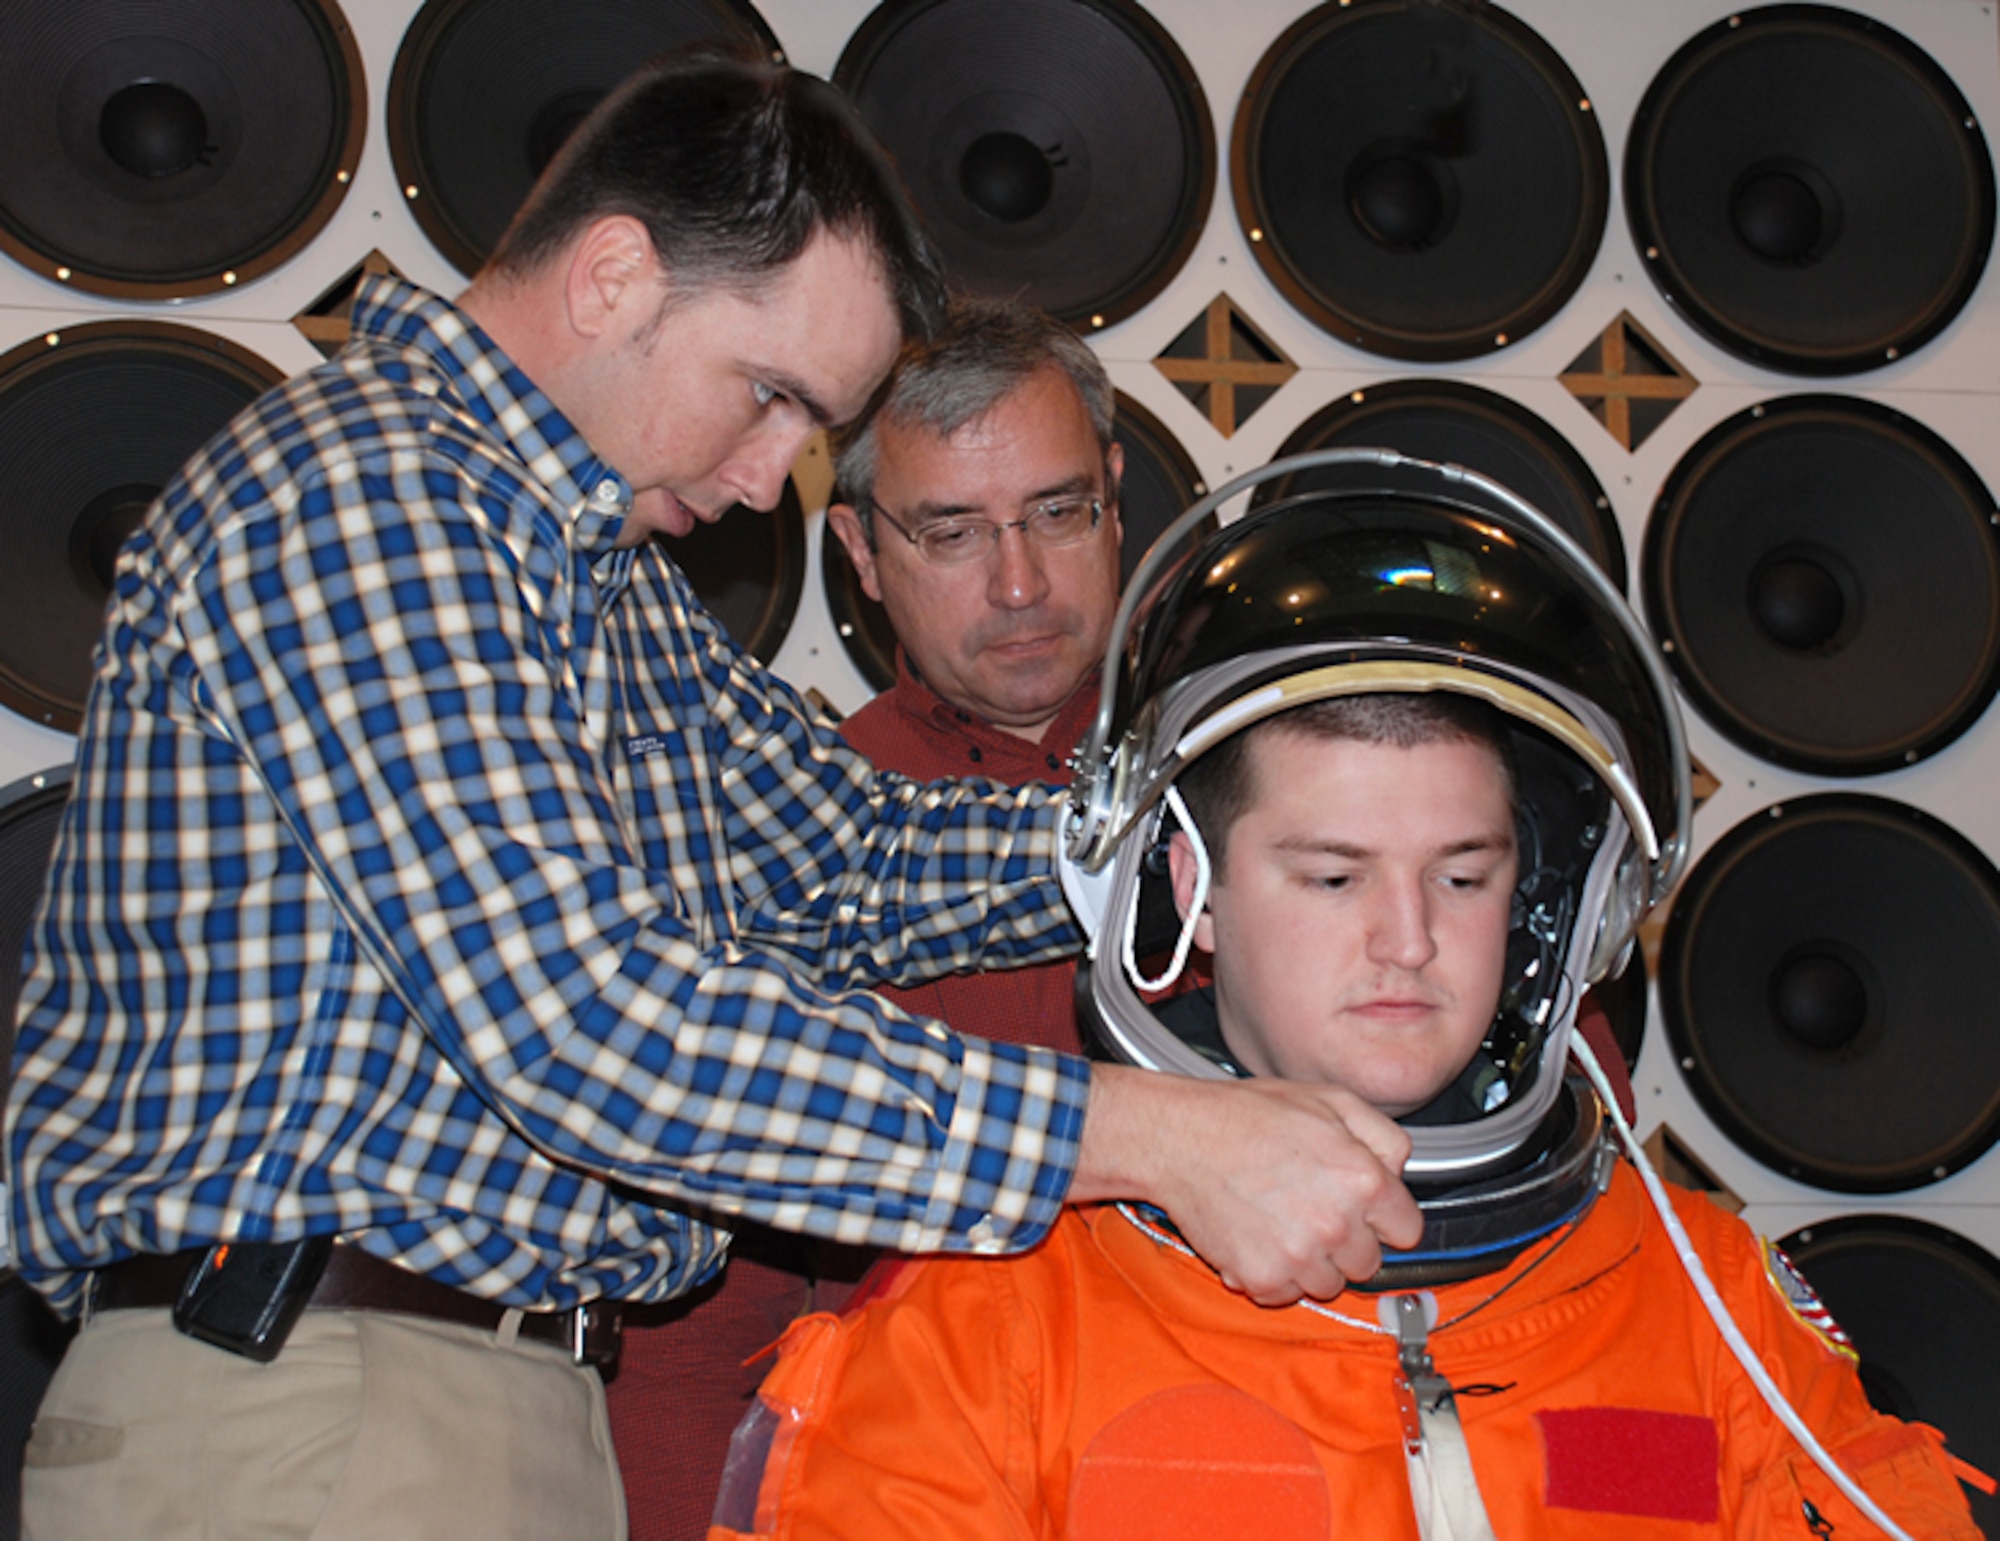 Engineer Dustin Gohmert of NASA’s Johnson Space Center installs a launch/entry helmet over the communications cap worn by test subject John Vinskey of General Dynamics Advanced Information Systems as audiologist Dr. Richard W. Danielson of the National Space Biomedical Research Institute observes. NASA and the Air Force Research Laboratory’s Human Effectiveness Directorate are conducting tests to determine the level of hearing protection provided by a new communications system. (Photo by Chris Gulliford, AFRL/HE)